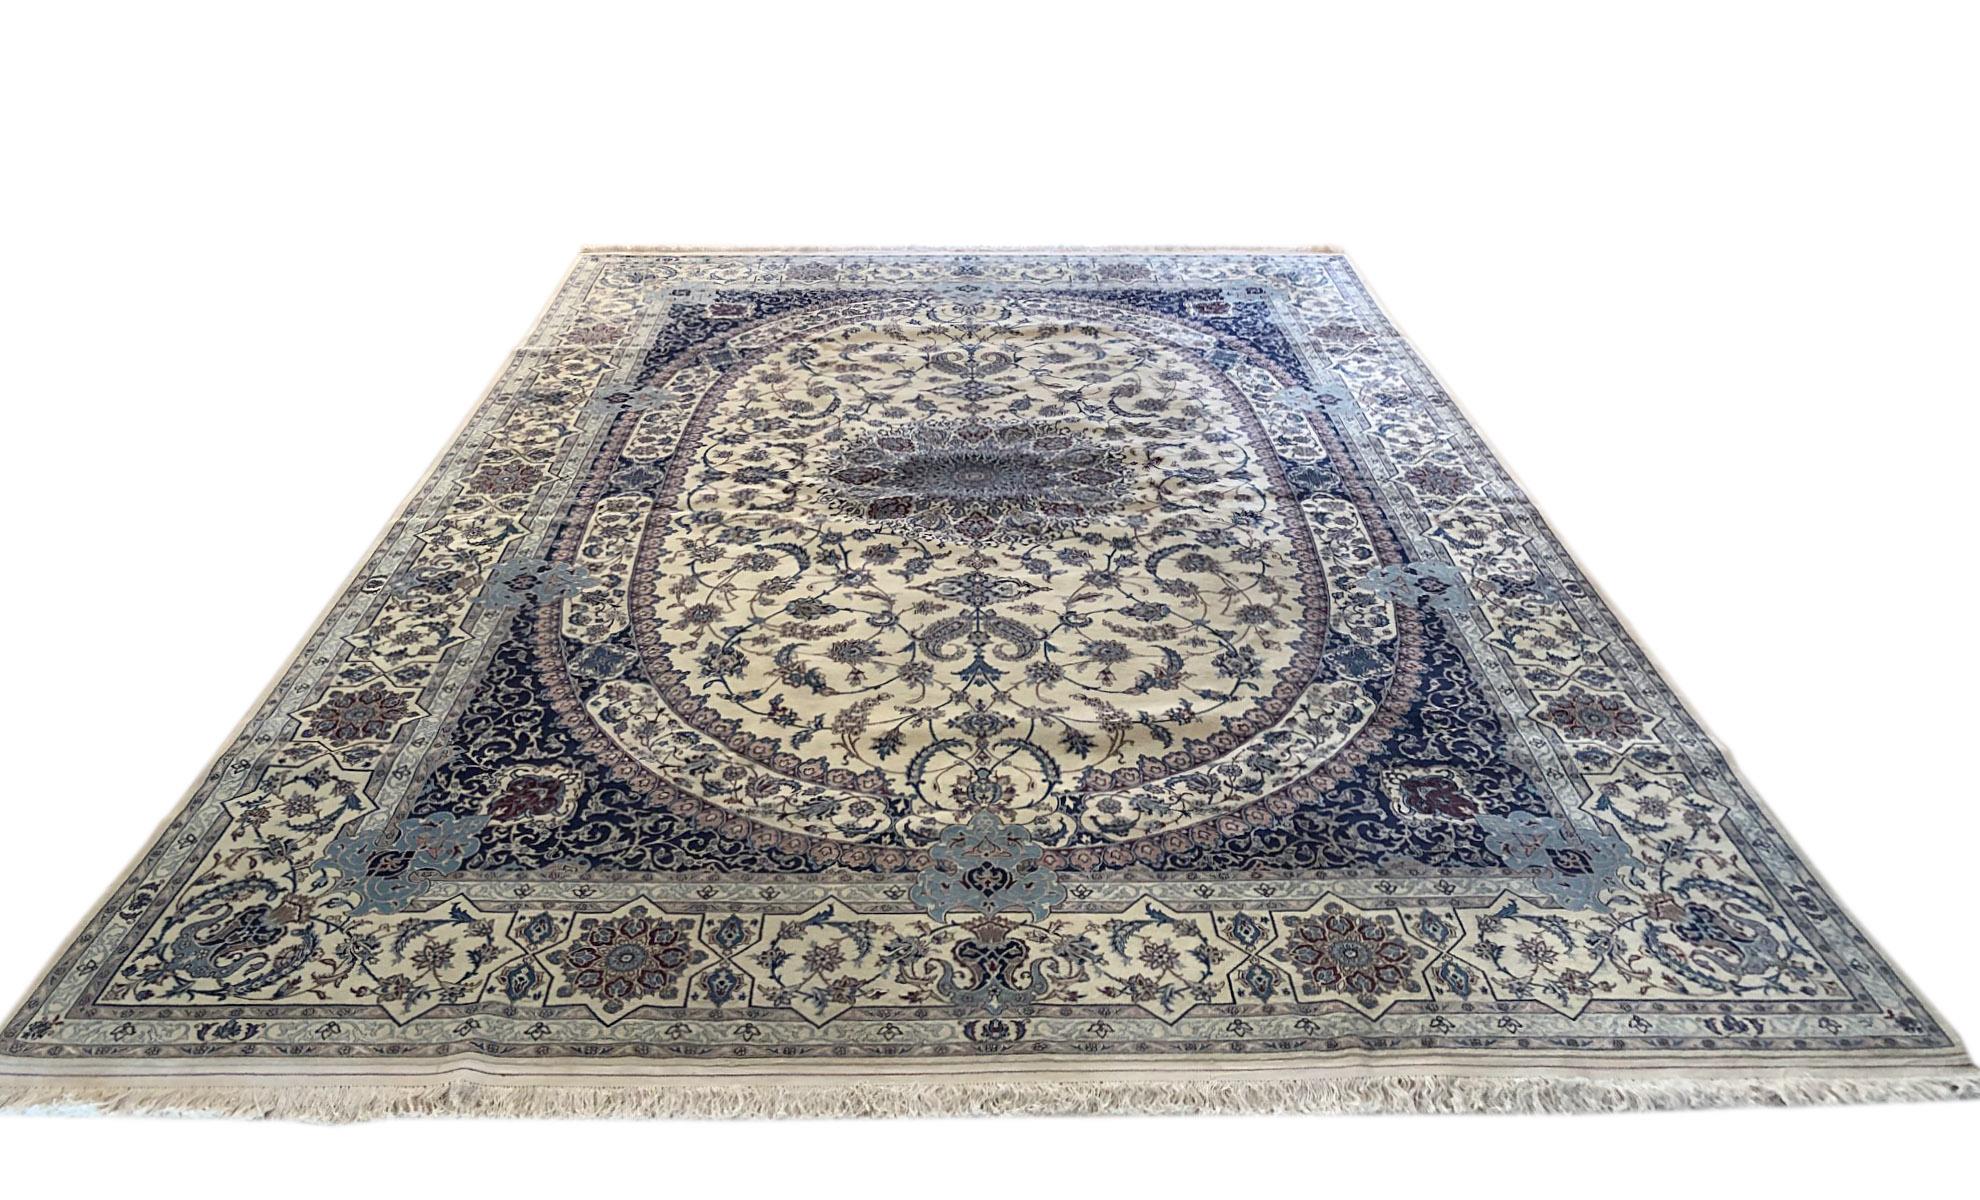 This handmade rug is a very fine and precise piece with high quality, made in the workshops in Nain city in Iran. This piece has wool and silk pile with cotton foundation. Nain is a city in Iran that is well known for producing fine handmade rug.